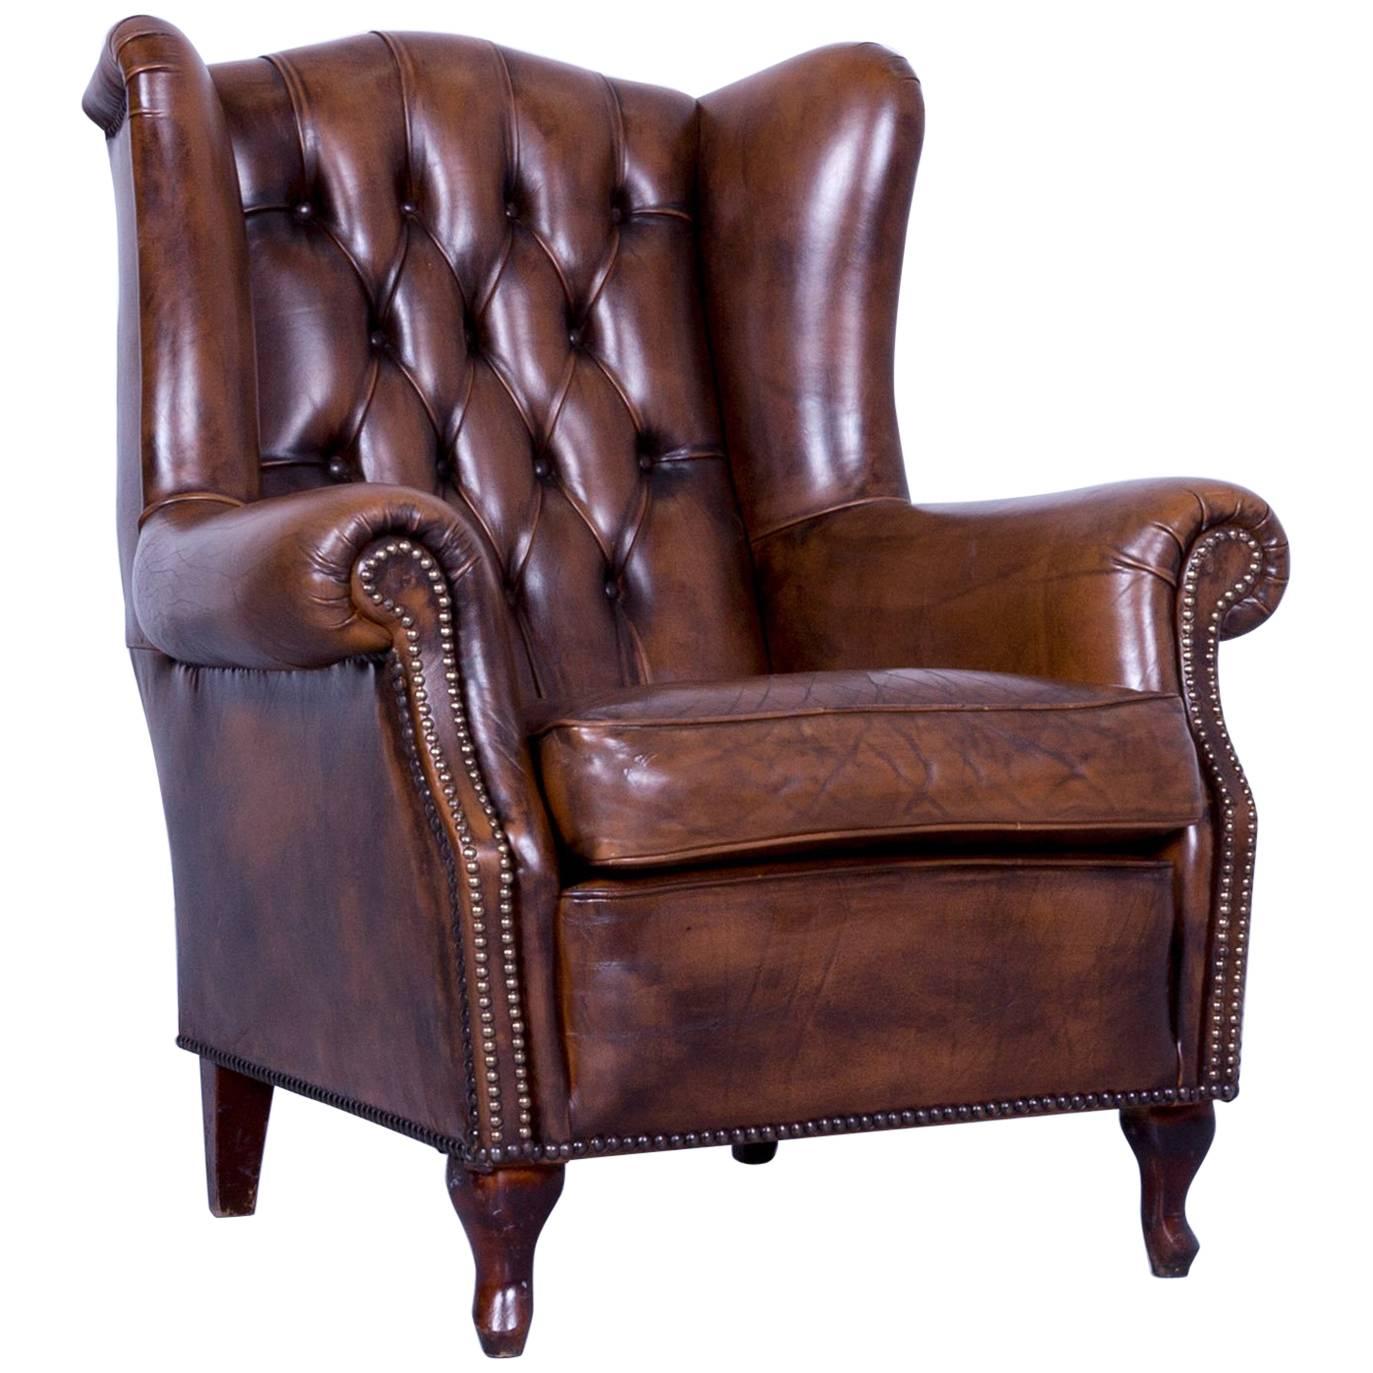 Chesterfield Armchair Brown Cocker Leather Buttoned Vintage Retro Wood Handmade For Sale